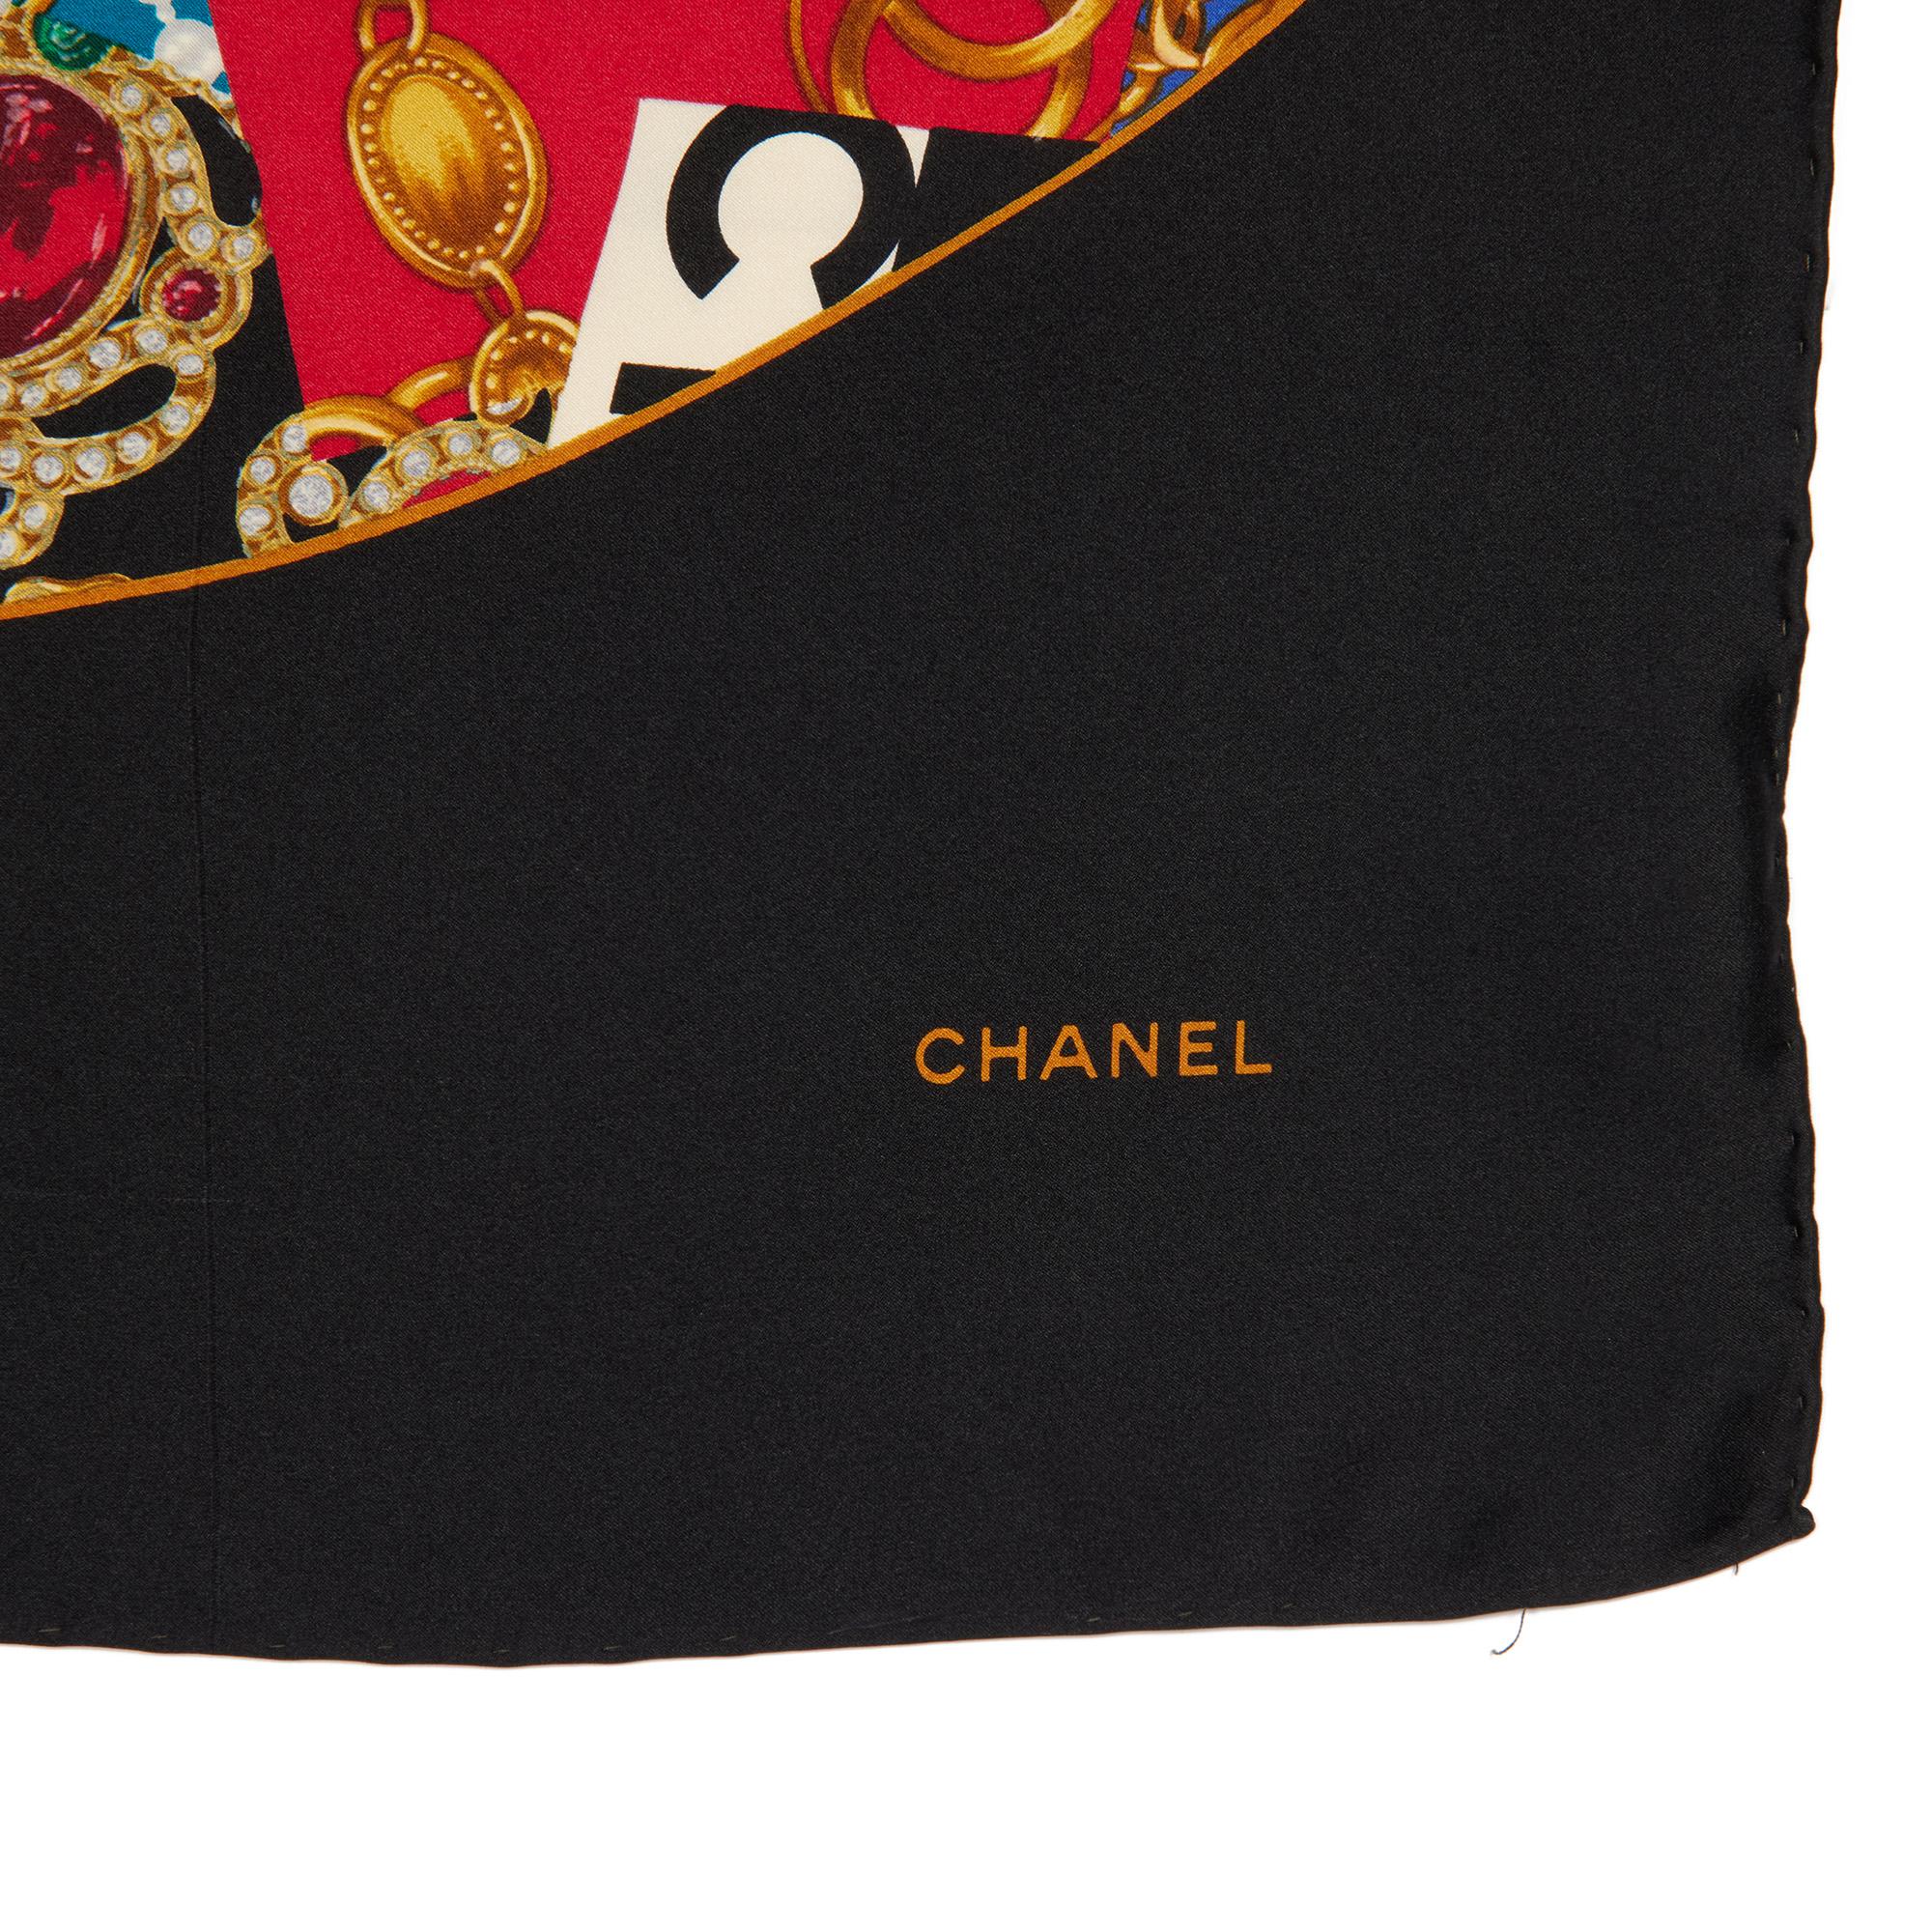 Chanel BLACK & MULTICOLOUR JEWELED SILK VINTAGE CC SCARF

CONDITION NOTES
The exterior is in excellent condition with minimal signs of use.
Overall this item is in excellent pre-owned condition. Please note the majority of the items we sell are